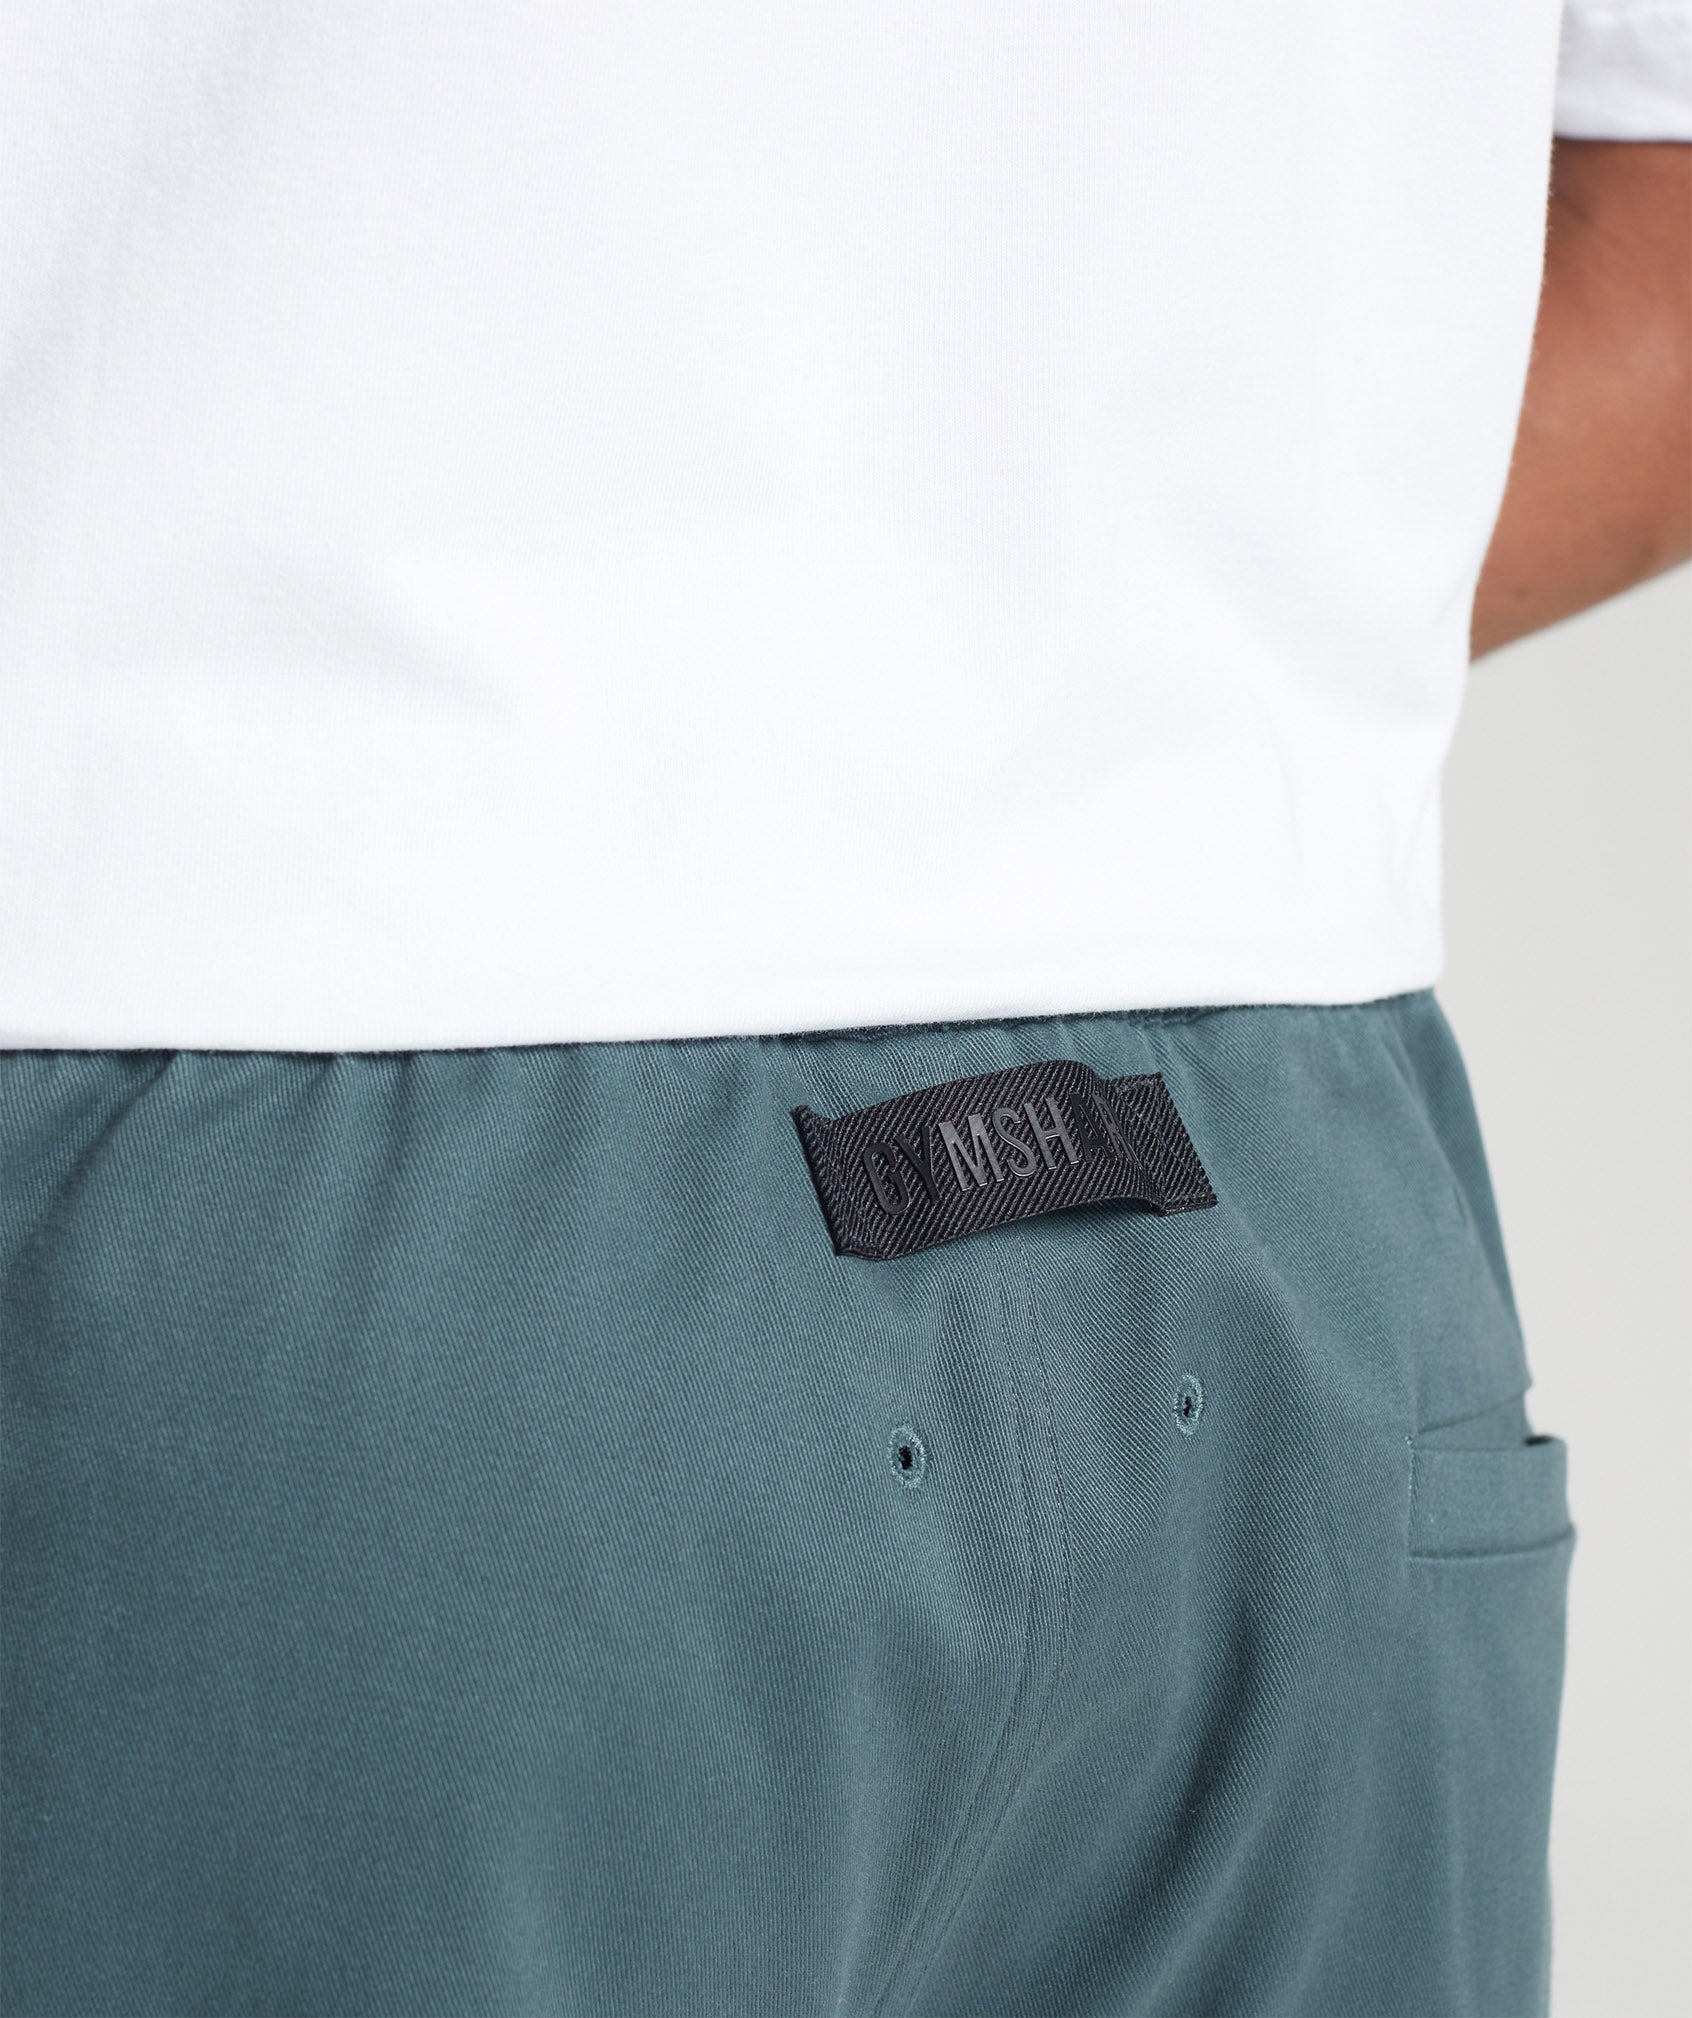 Rest Day Woven Shorts in Smokey Teal - view 5